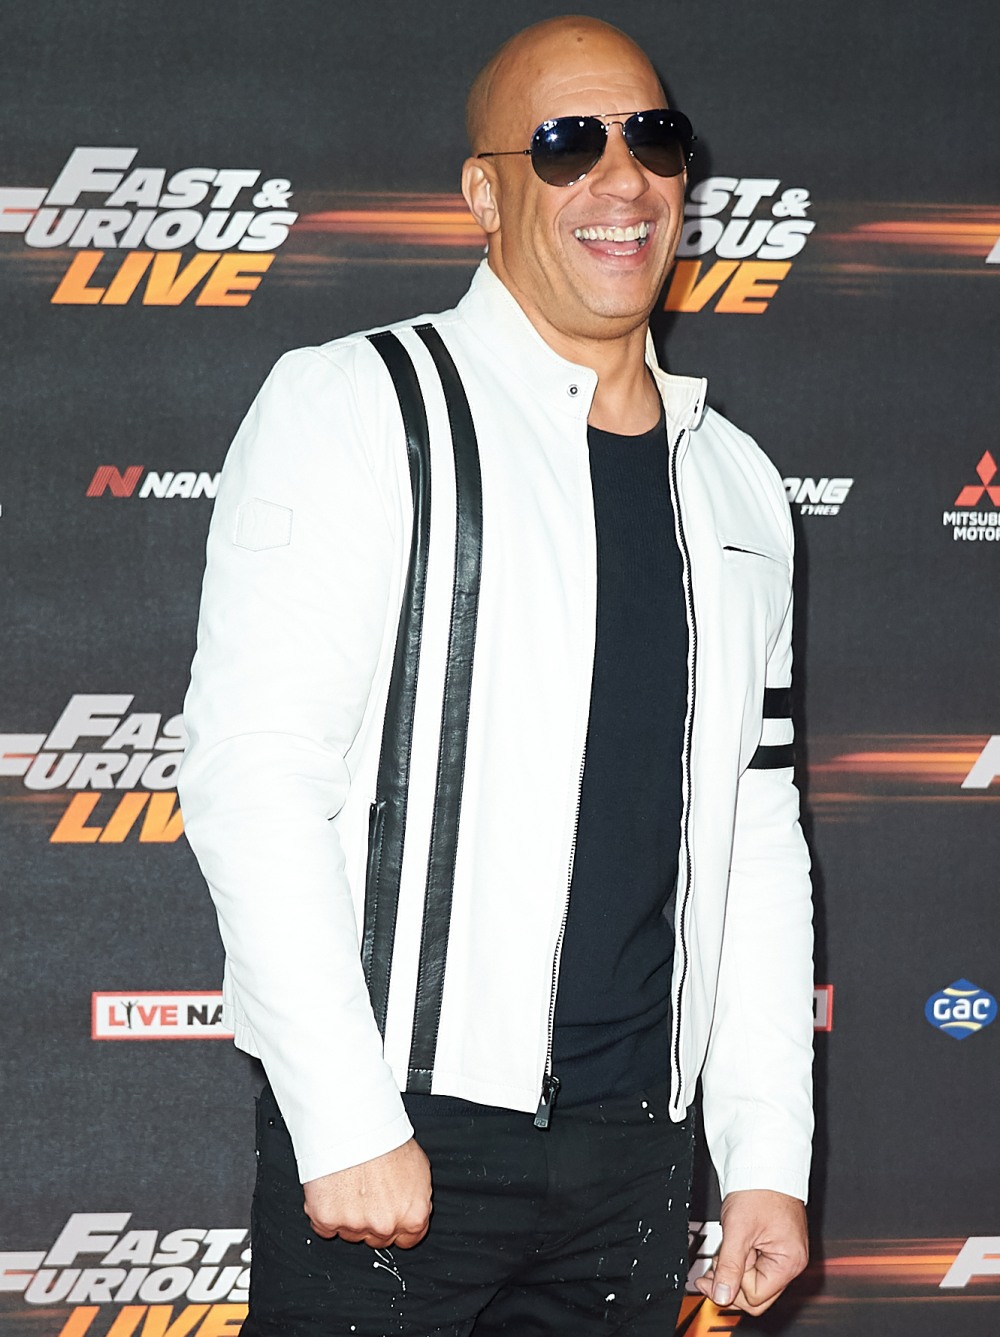 Fast & Furious Live Red Carpet Arrivals